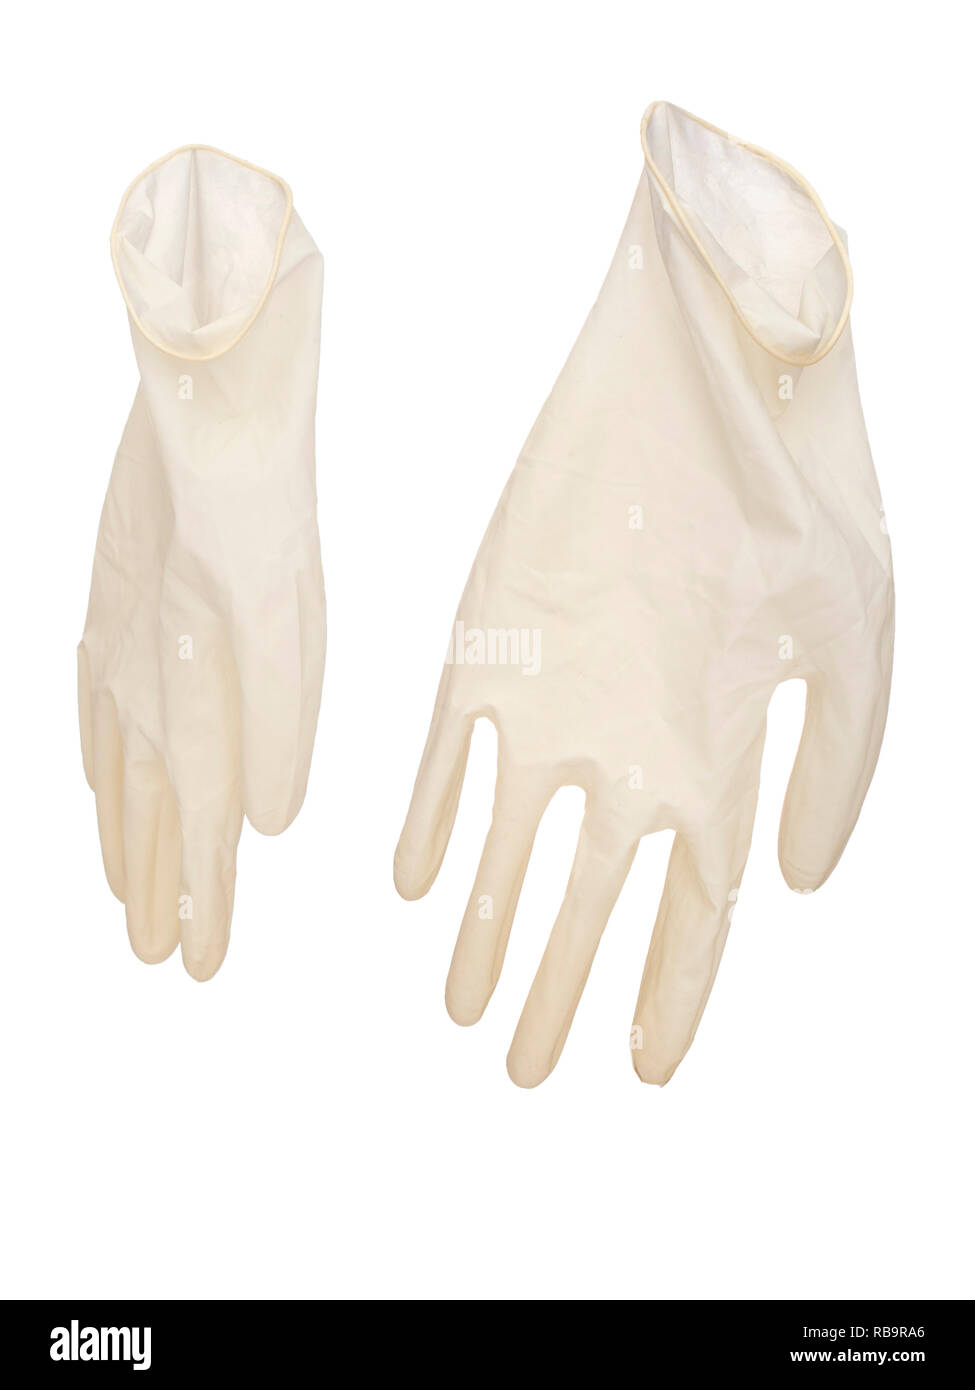 Pair of thin latex medical gloves isolated on white background Stock Photo